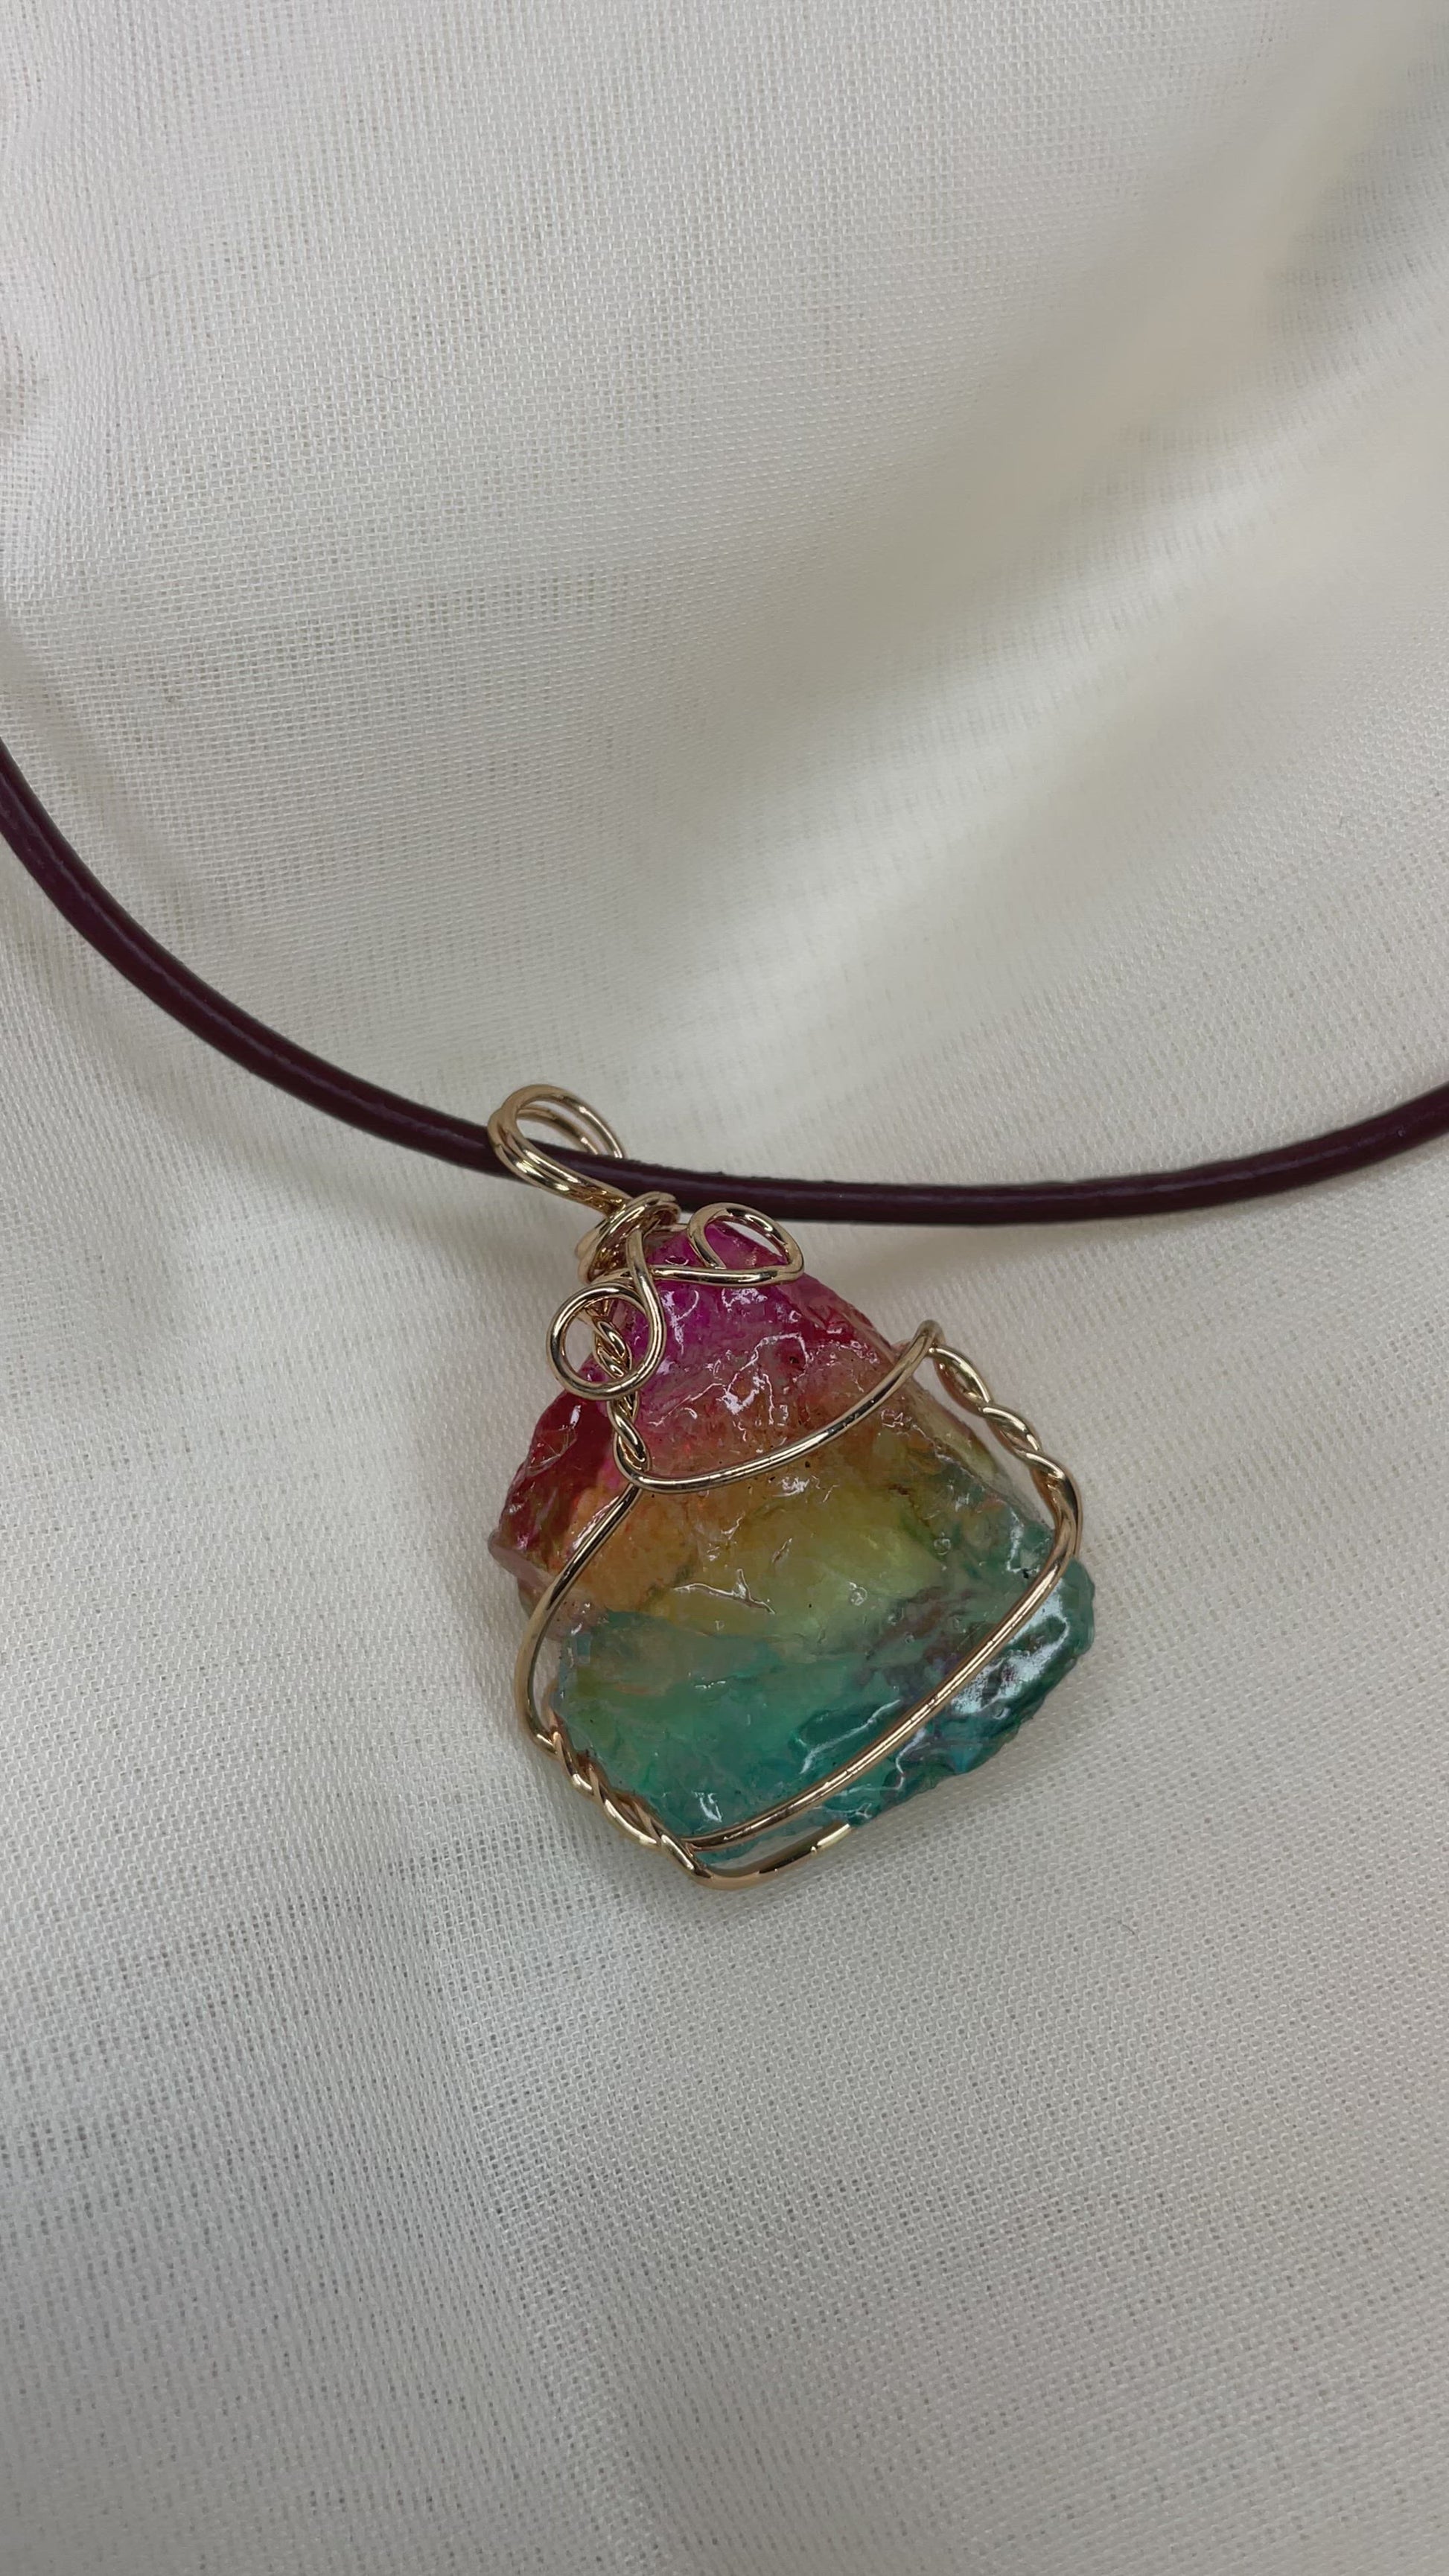 Handmade Healing Crystal Rock Stone Waterdrop Turquoise Pendant Necklace  Birthstone Gold Plated Full Wire Wrap With PU Cord Chain Jewelry From  Miniskirt, $10.28 | DHgate.Com